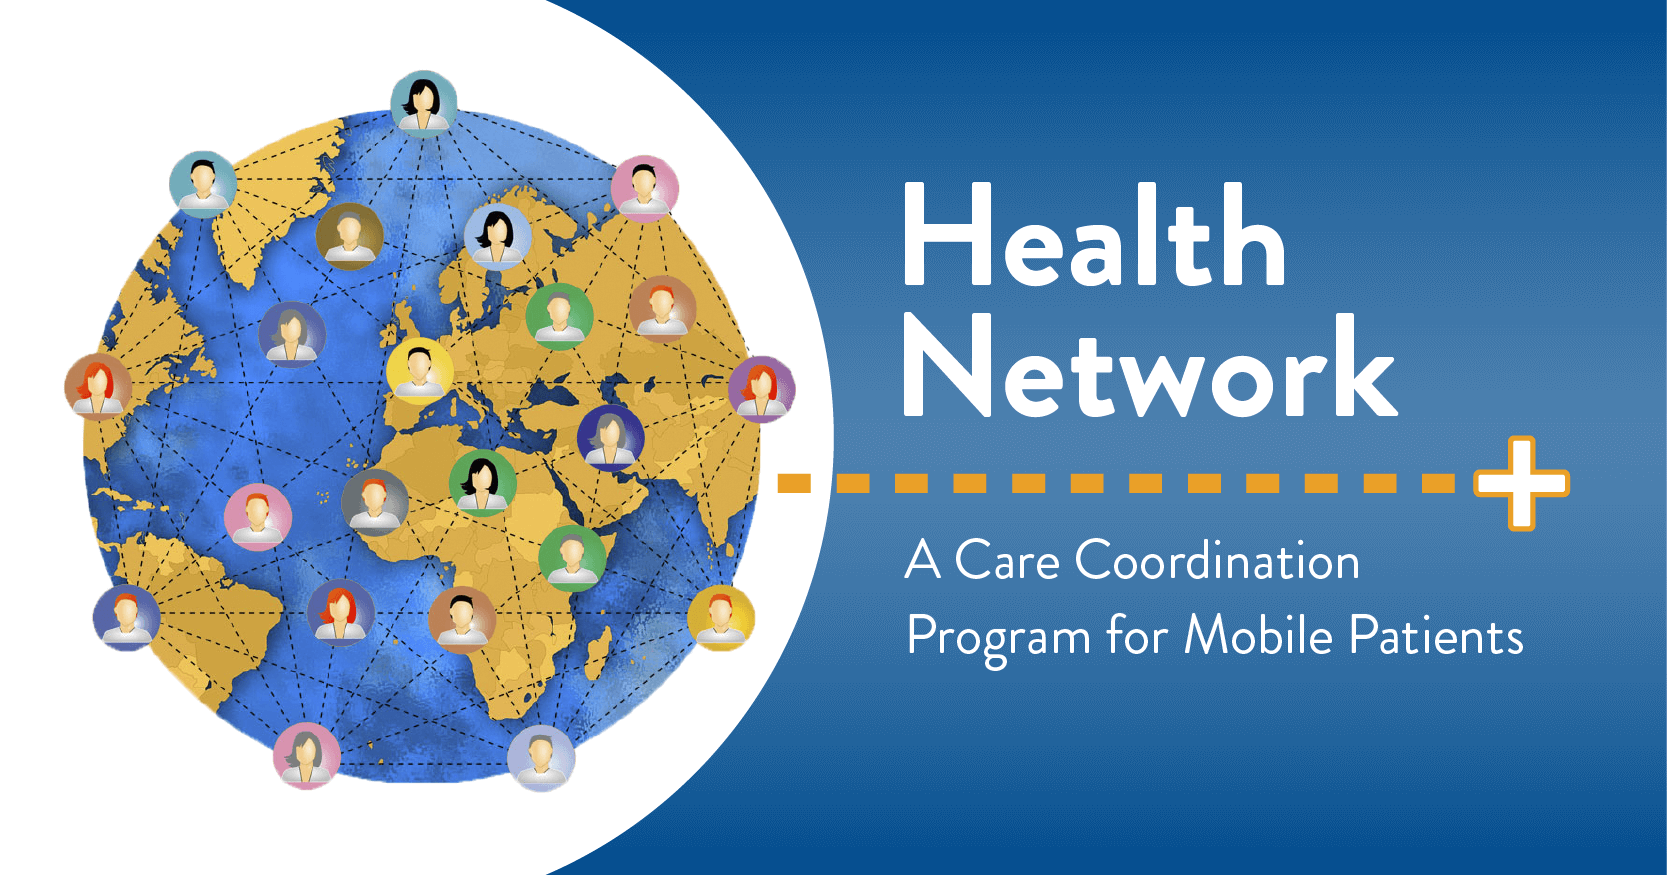 Health Network: A Care Coordination Program for Mobile Patients